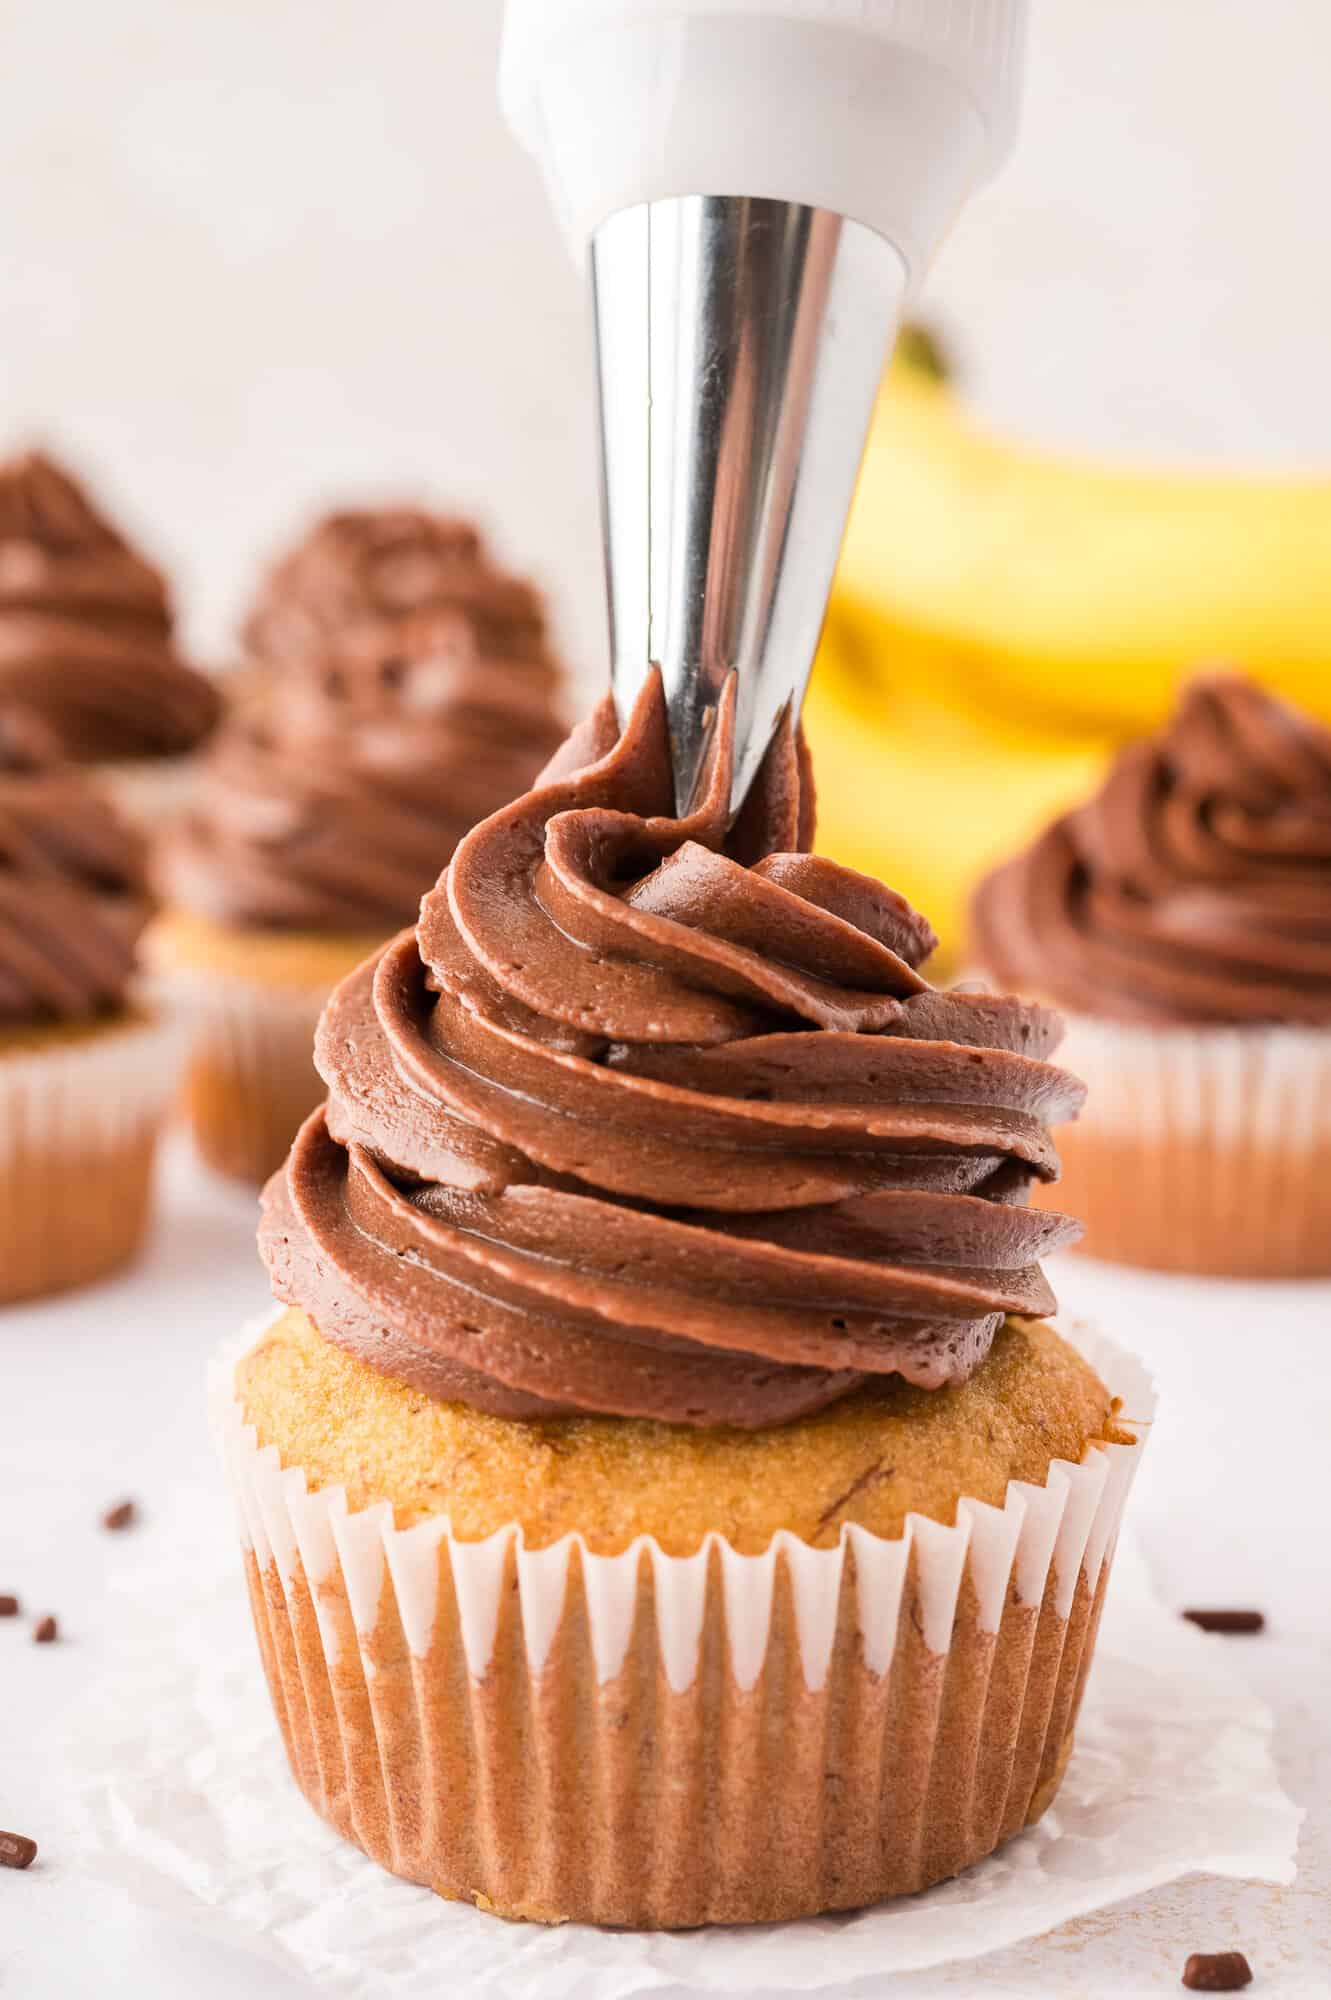 Chocolate frosting being piped onto a banana cupcake.